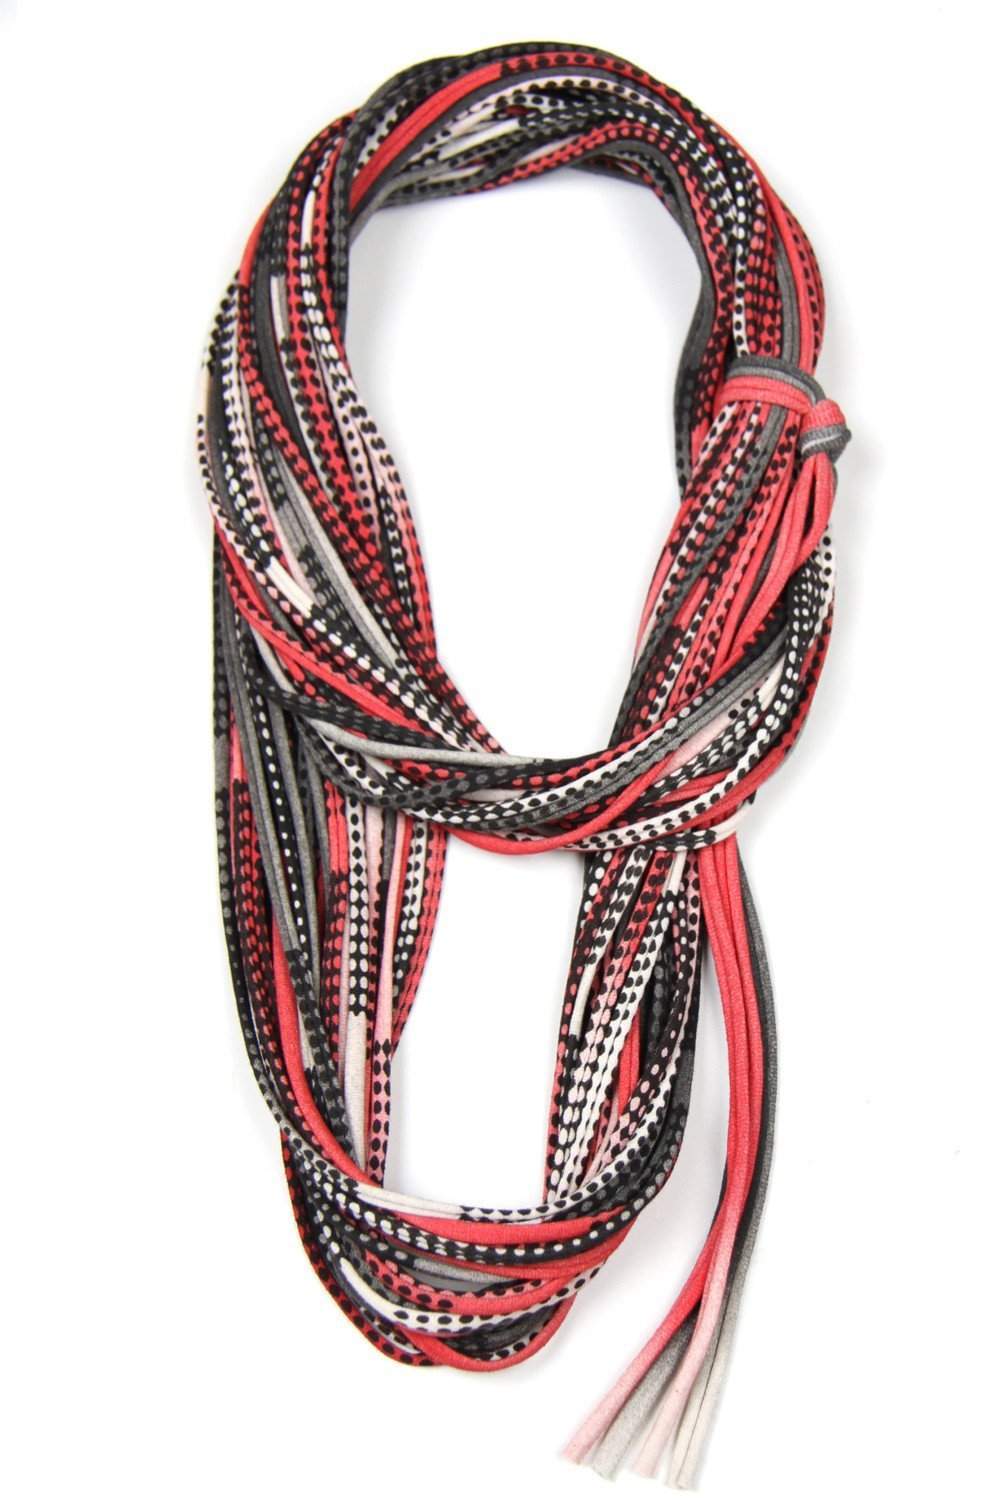 infinity scarves-Red and Black Infinity Scarf-Necklush